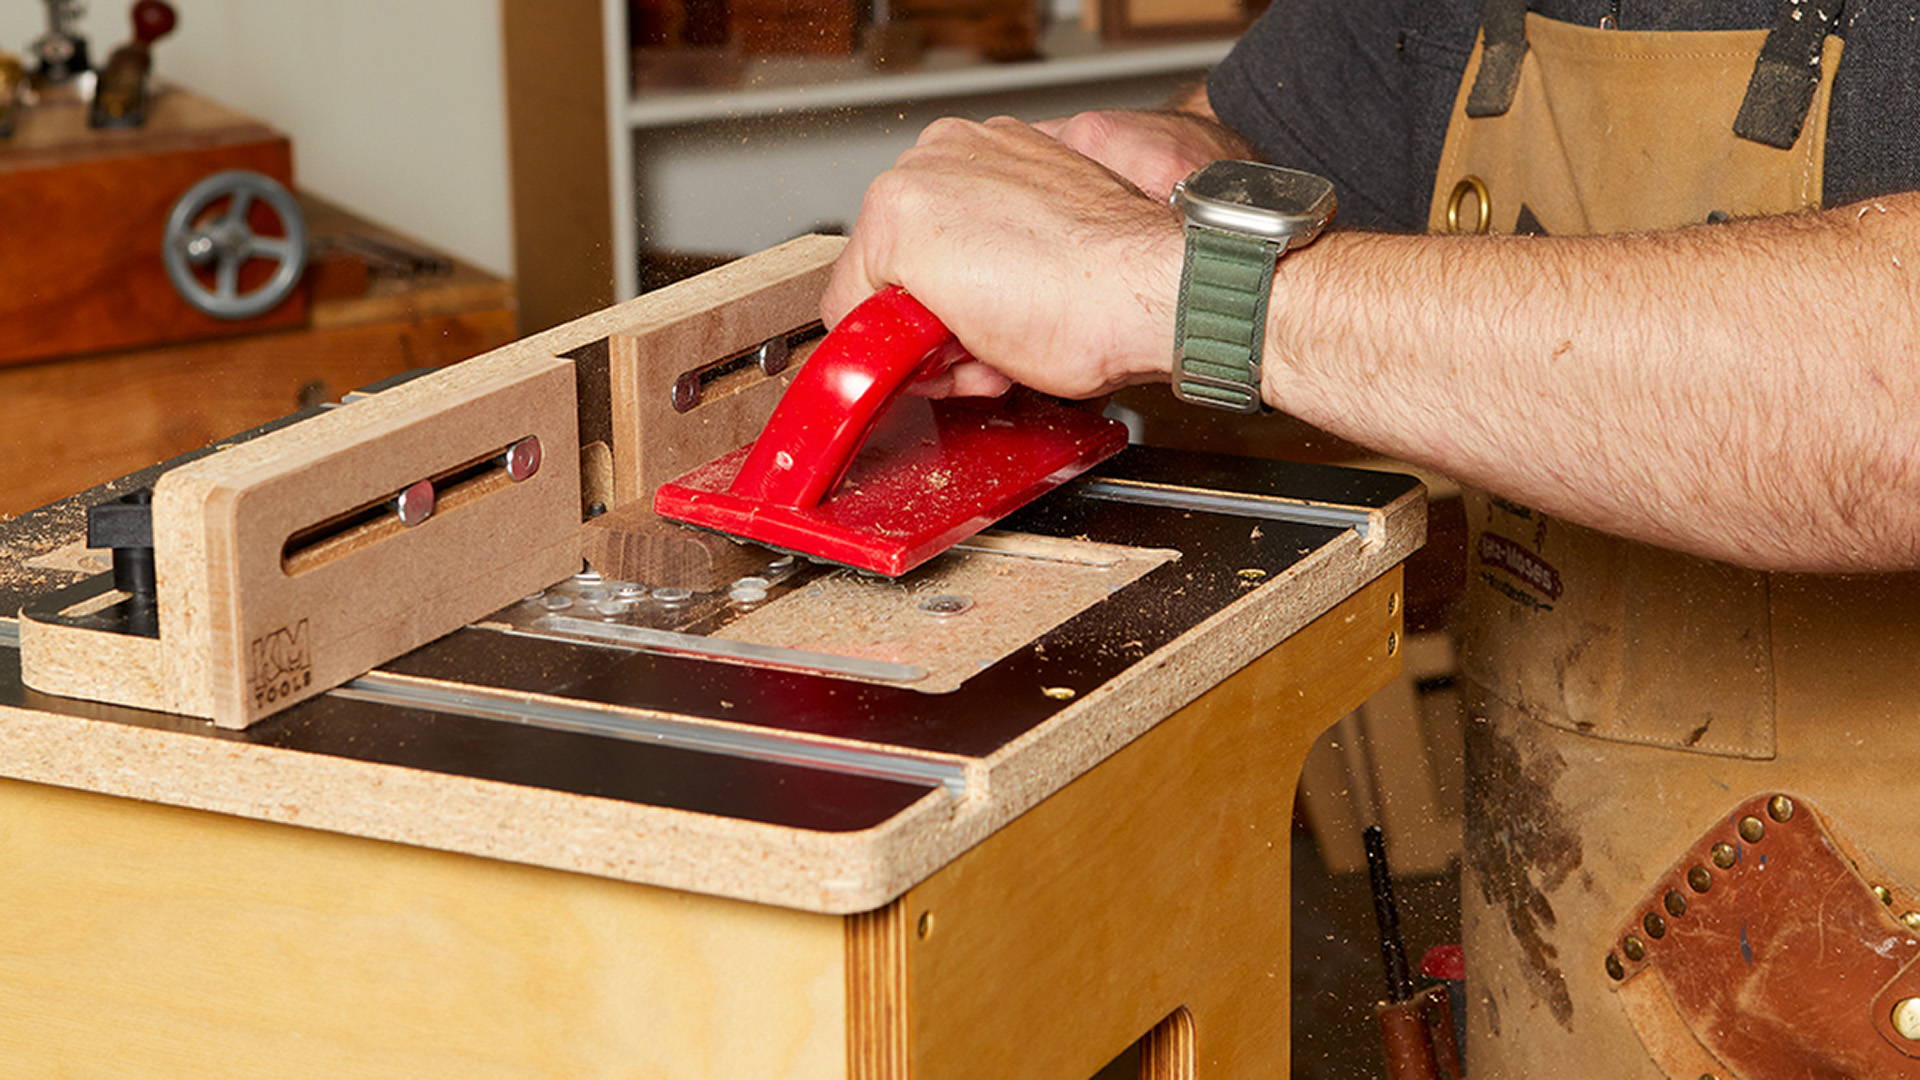 Router Table 101: Intro to One of the Shop’s Most Versatile Tools